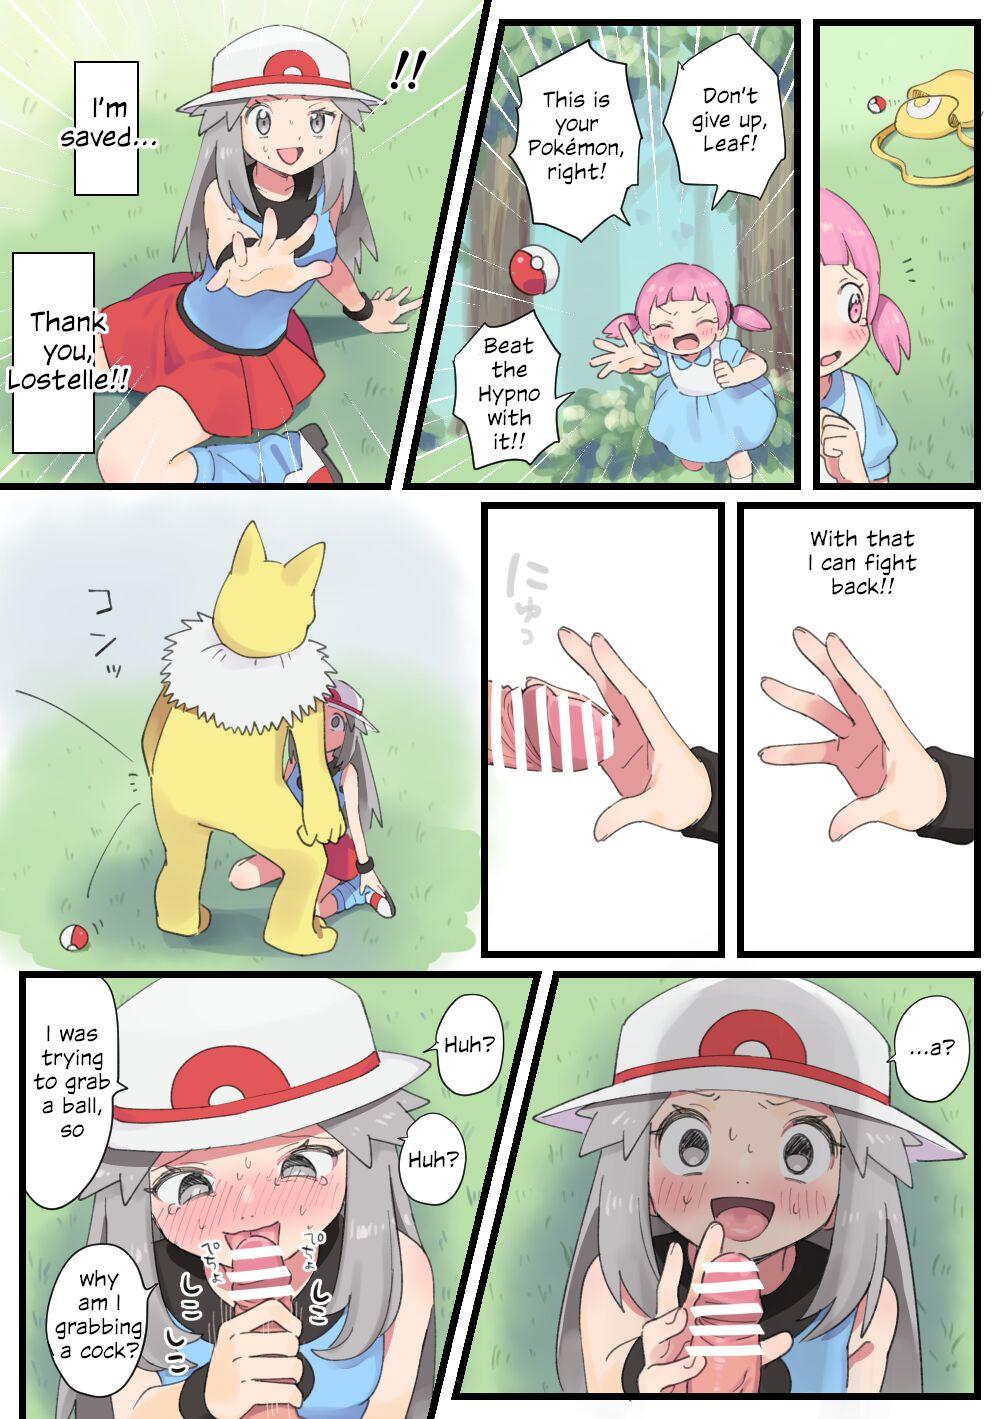 Hardcore Fucking Leaf goes to help Mayo-chan and gets hypnotically raped by Hypno - Pokemon | pocket monsters Japan - Page 2